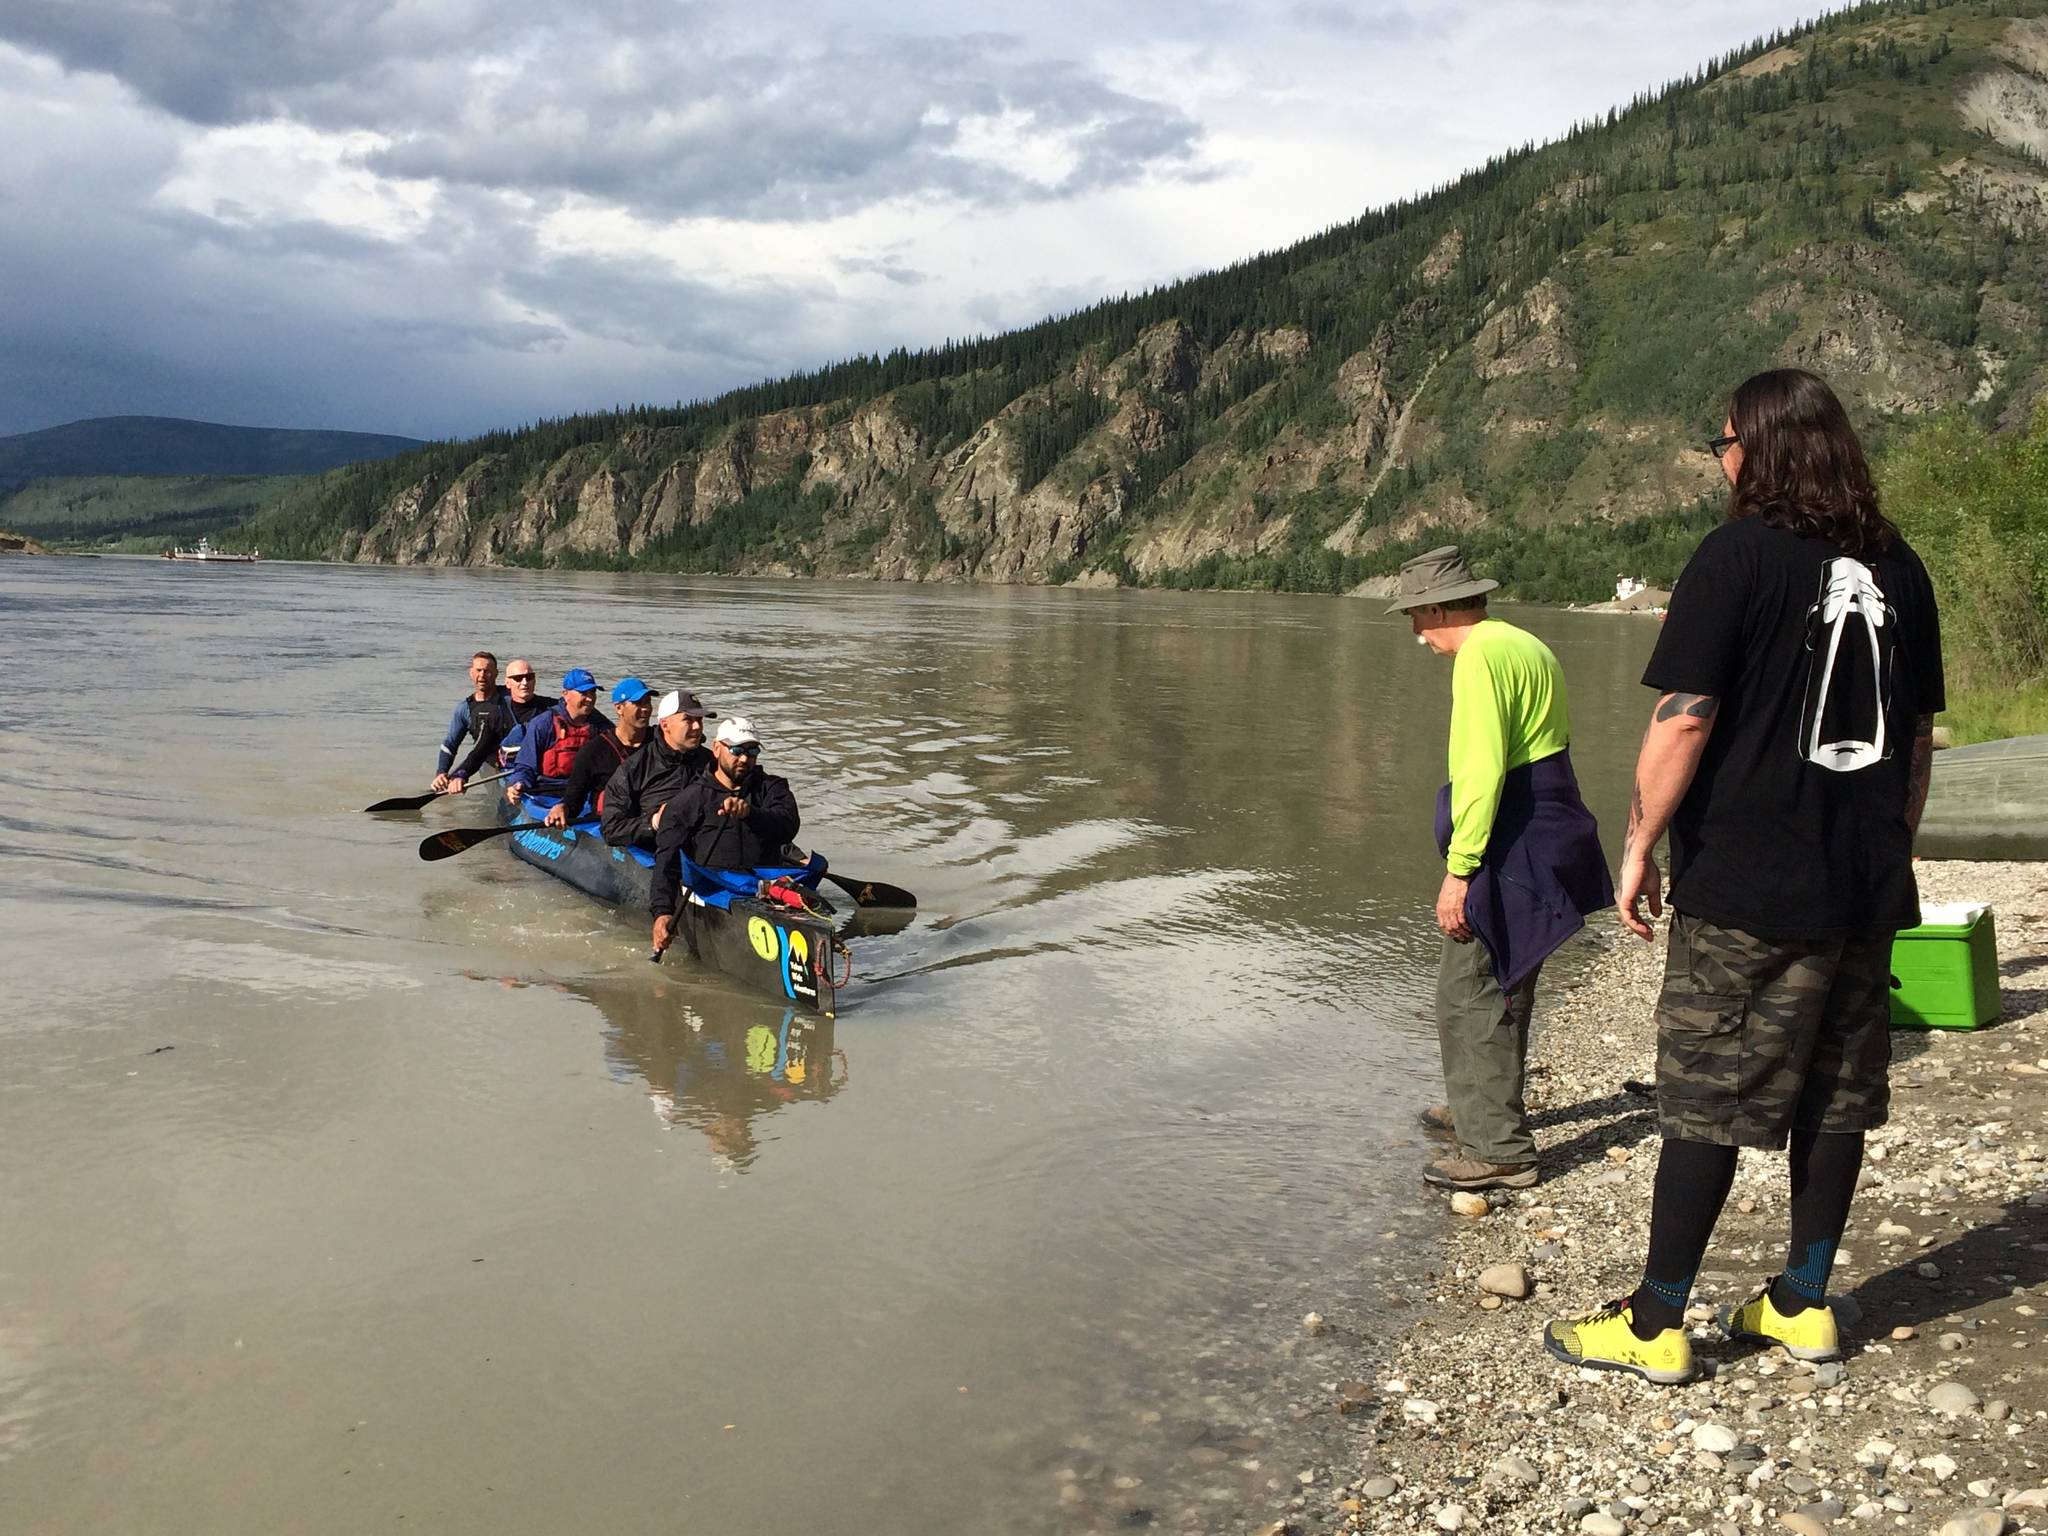 Yukon Wide Adventures pulls their voyageur canoe ashore on Friday evening in Dawson City, Yukon. The team finished the race first overall and first in the voyageur canoe category. (Courtesy Photo | Eva Holland)